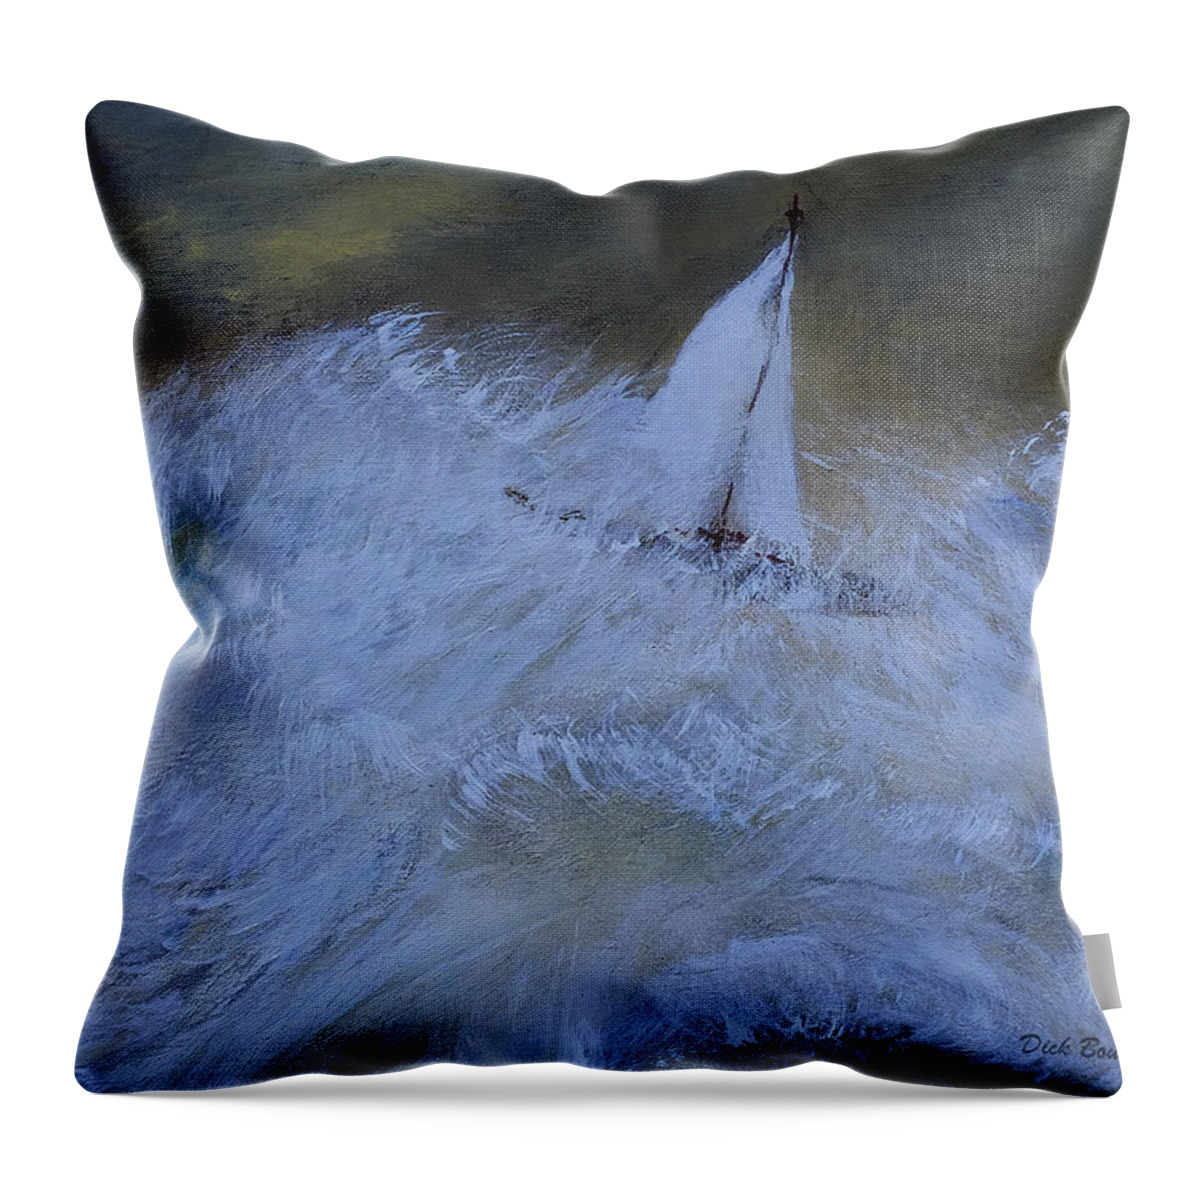 Ship Throw Pillow featuring the painting Peril at Sea by Dick Bourgault